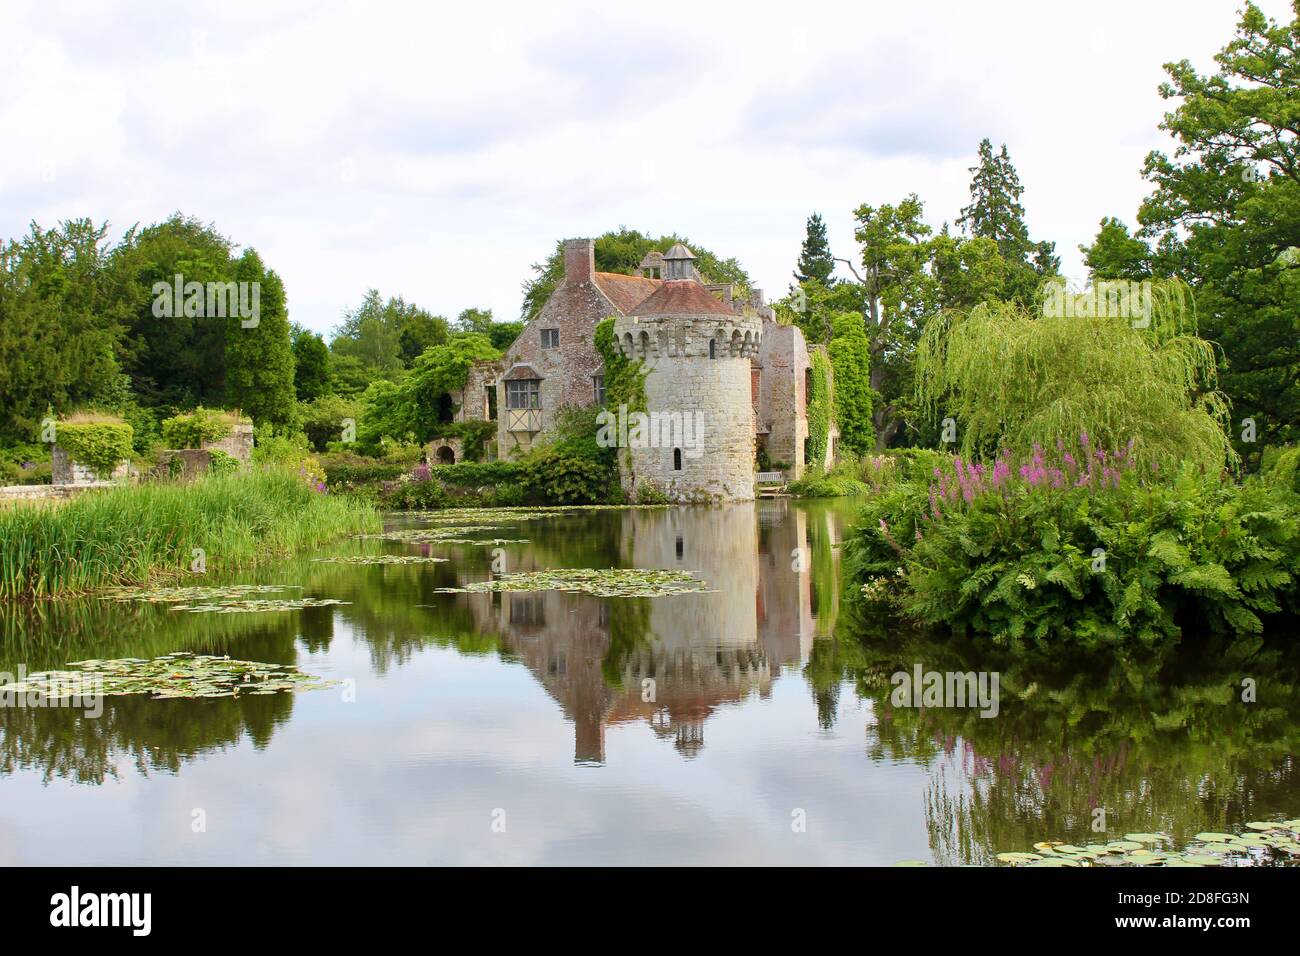 Scotney Castle Lake and Gardens in Summer. This beautiful and historic landscape is located in the valley of the River Bewl near Lamberhurst in Kent. Stock Photo